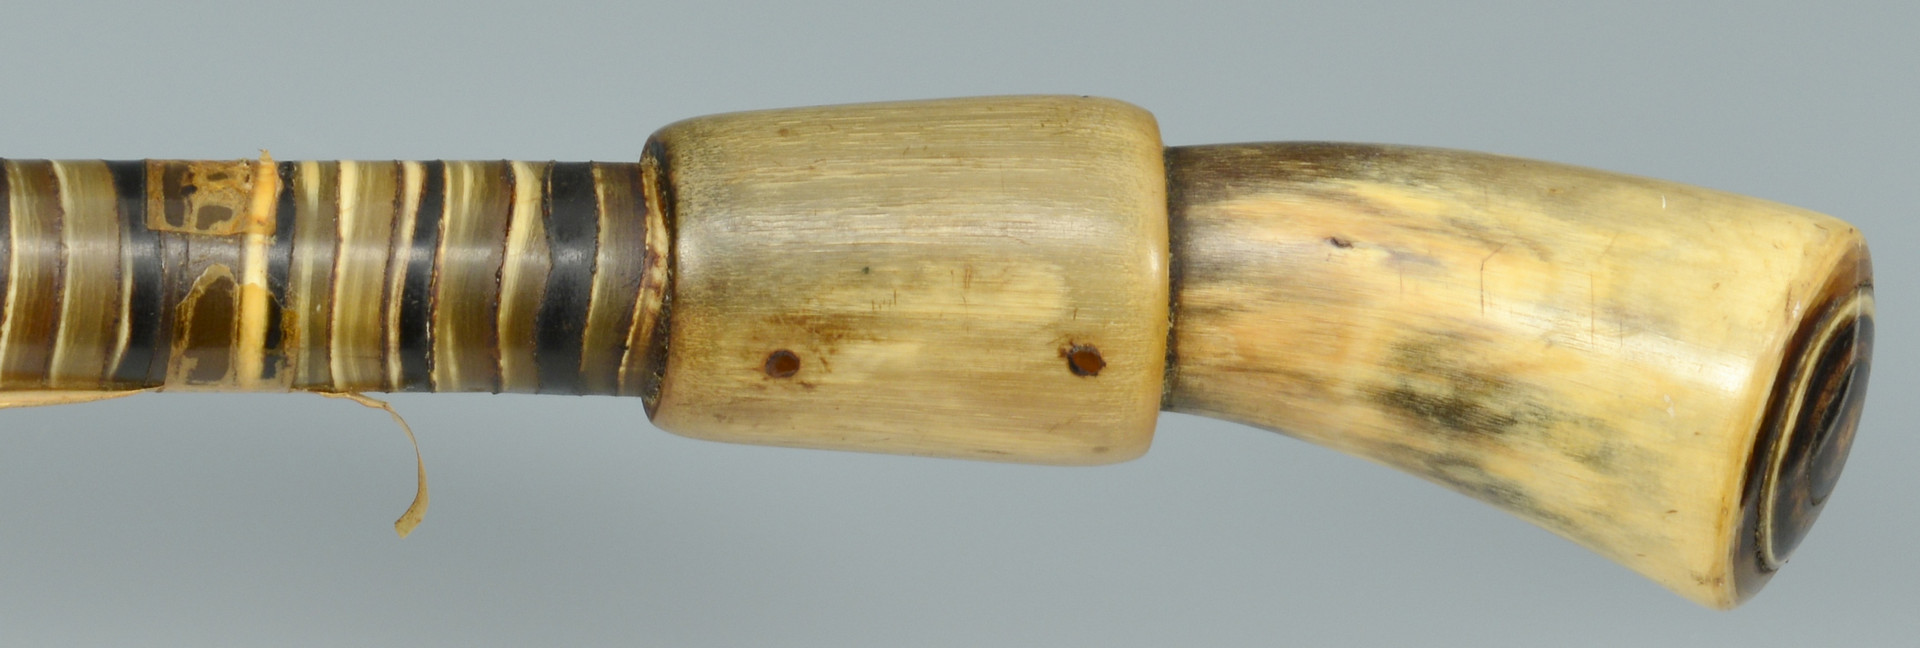 Lot 410: Powder Horn, Pres. Harrison-related designs and ho